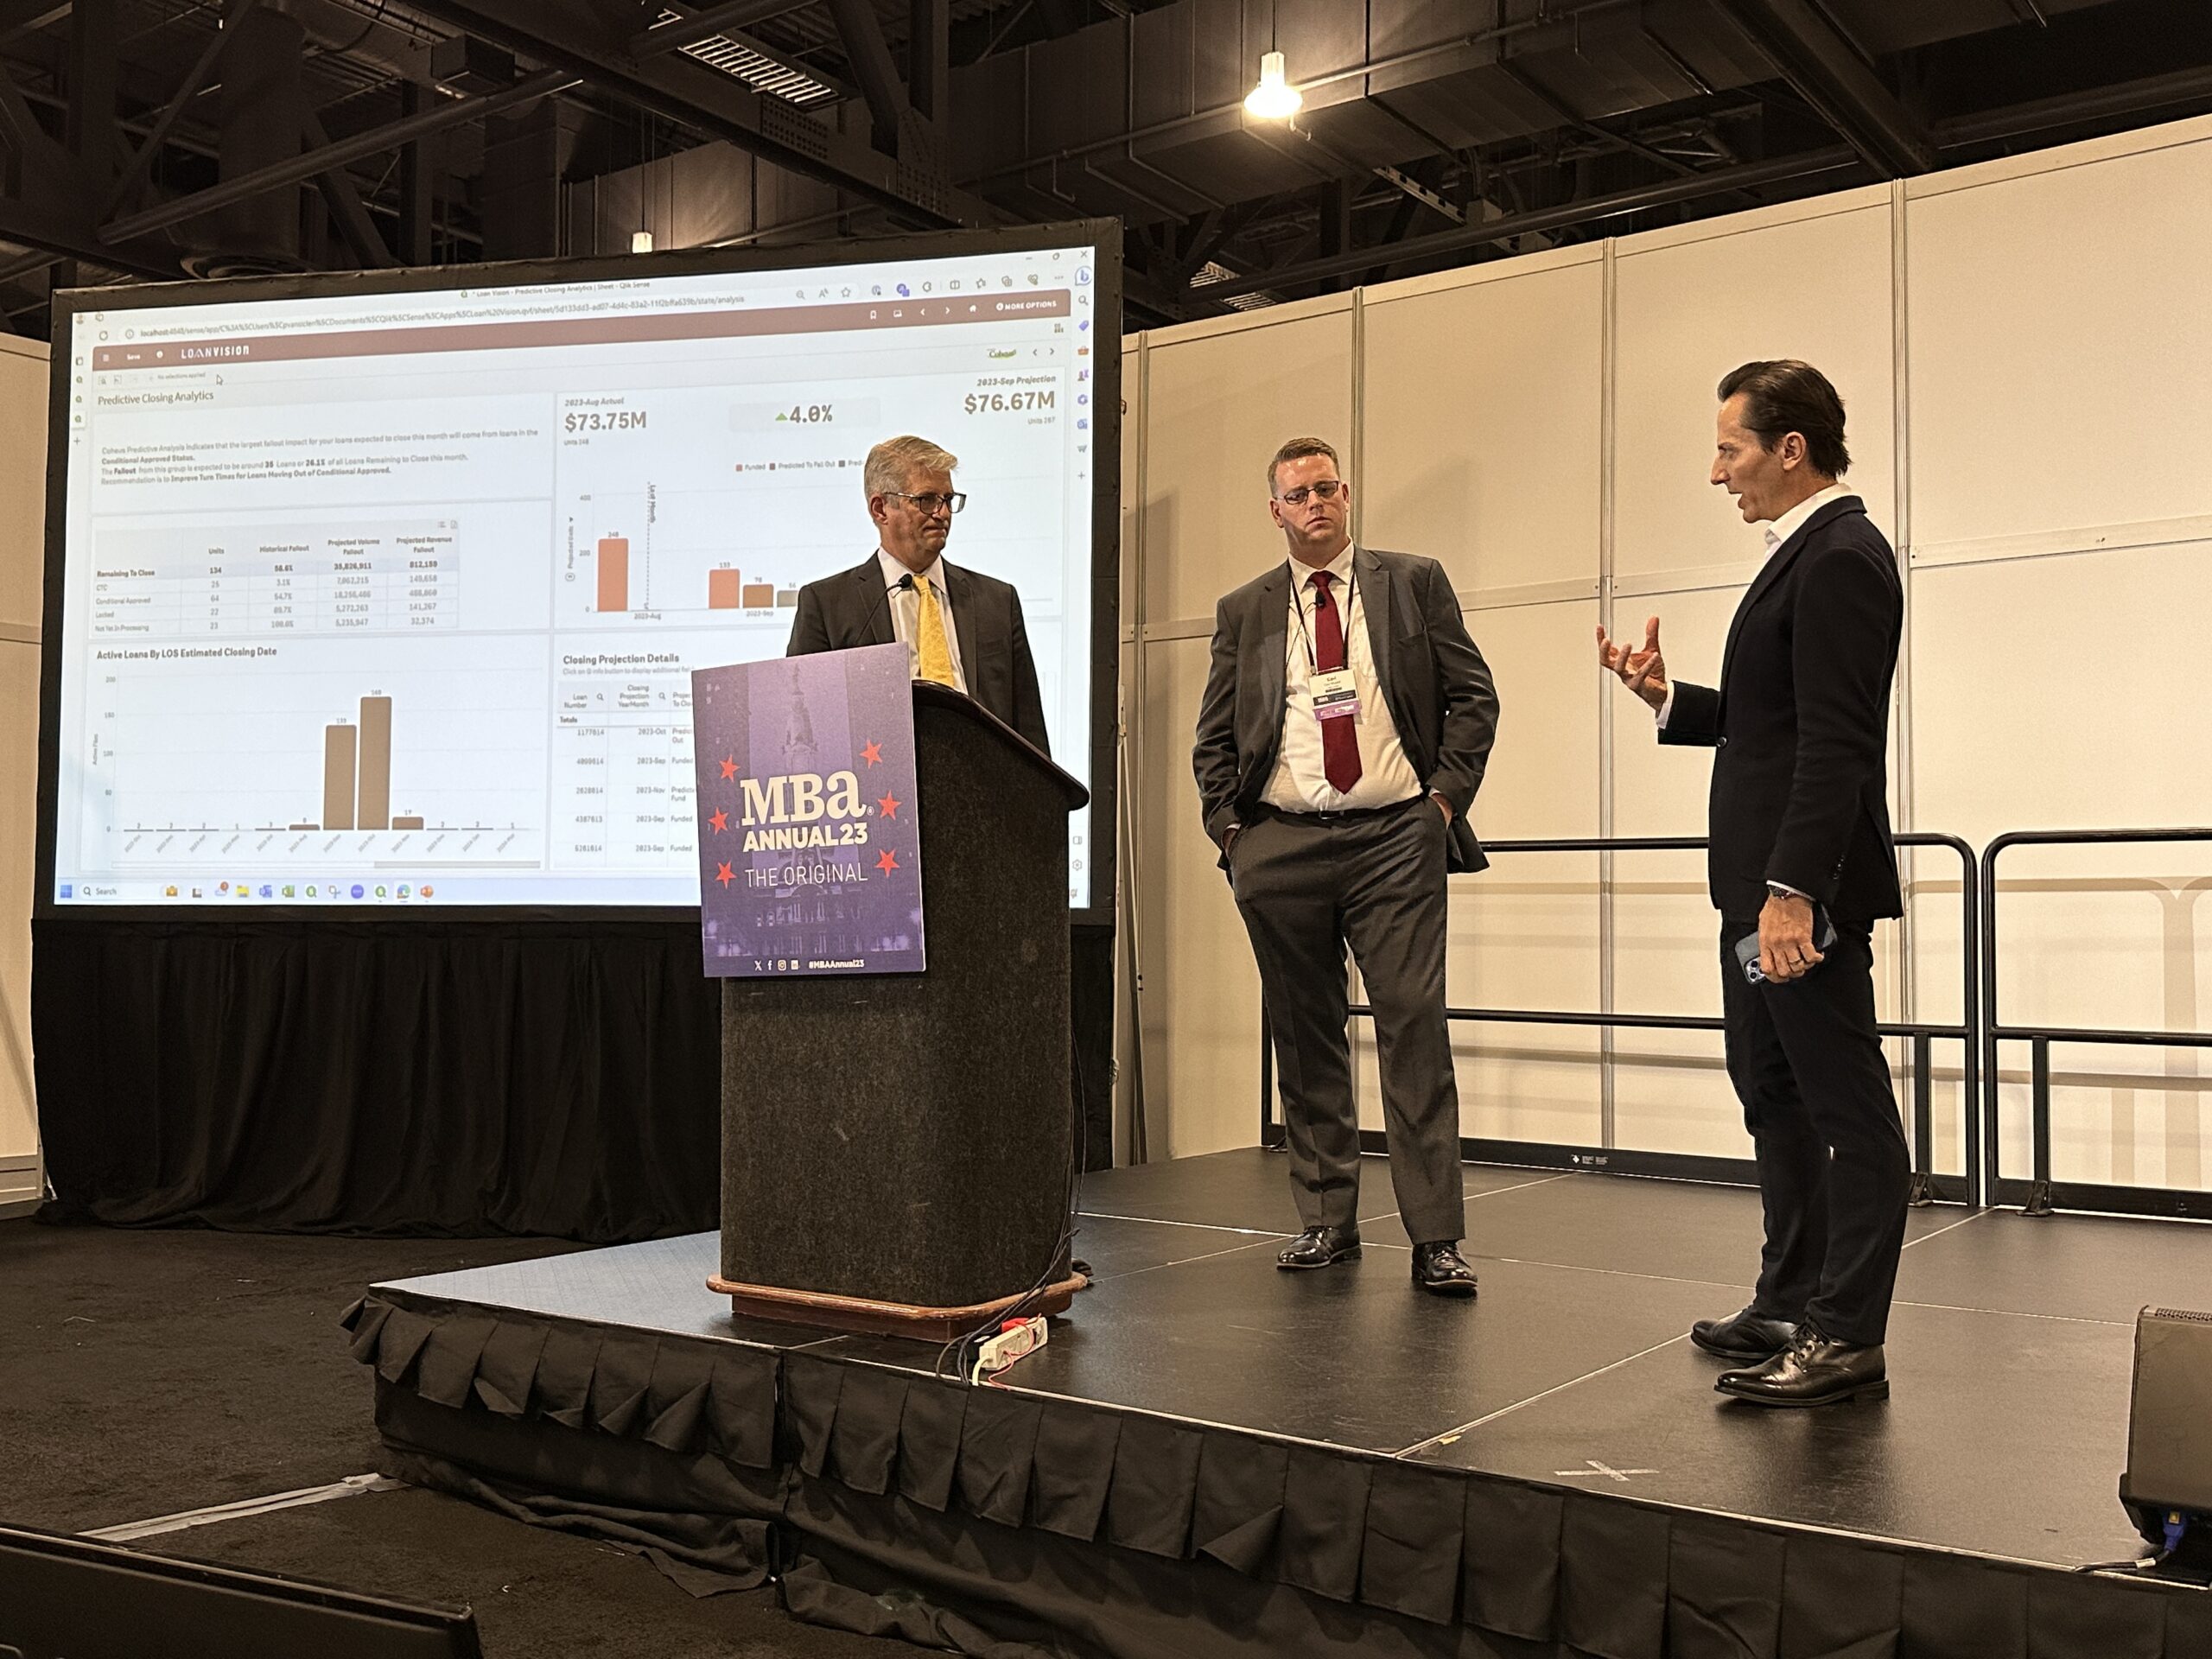 Julian Hebron On-Stage Feedback for Carl Wooloff Loan Vision and Paul Van Siclen Teraverde at Mortgage Technology Showcase, MBA Annual 2023 - The Basis PointJPG